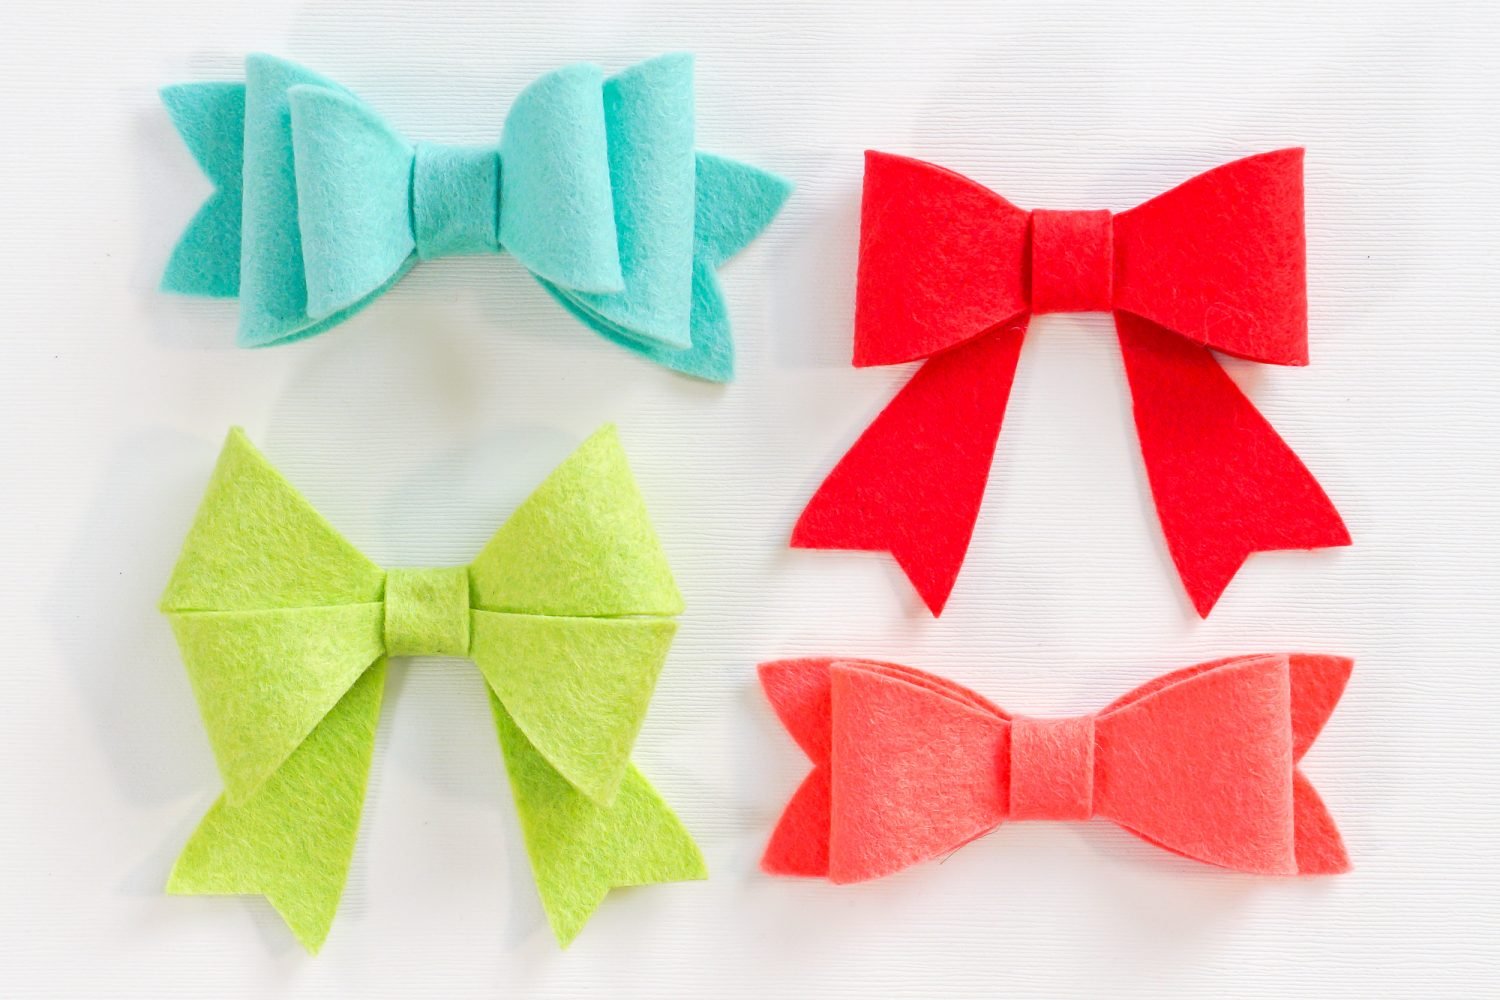 Close up picture of felt bows in aqua, red and green colors